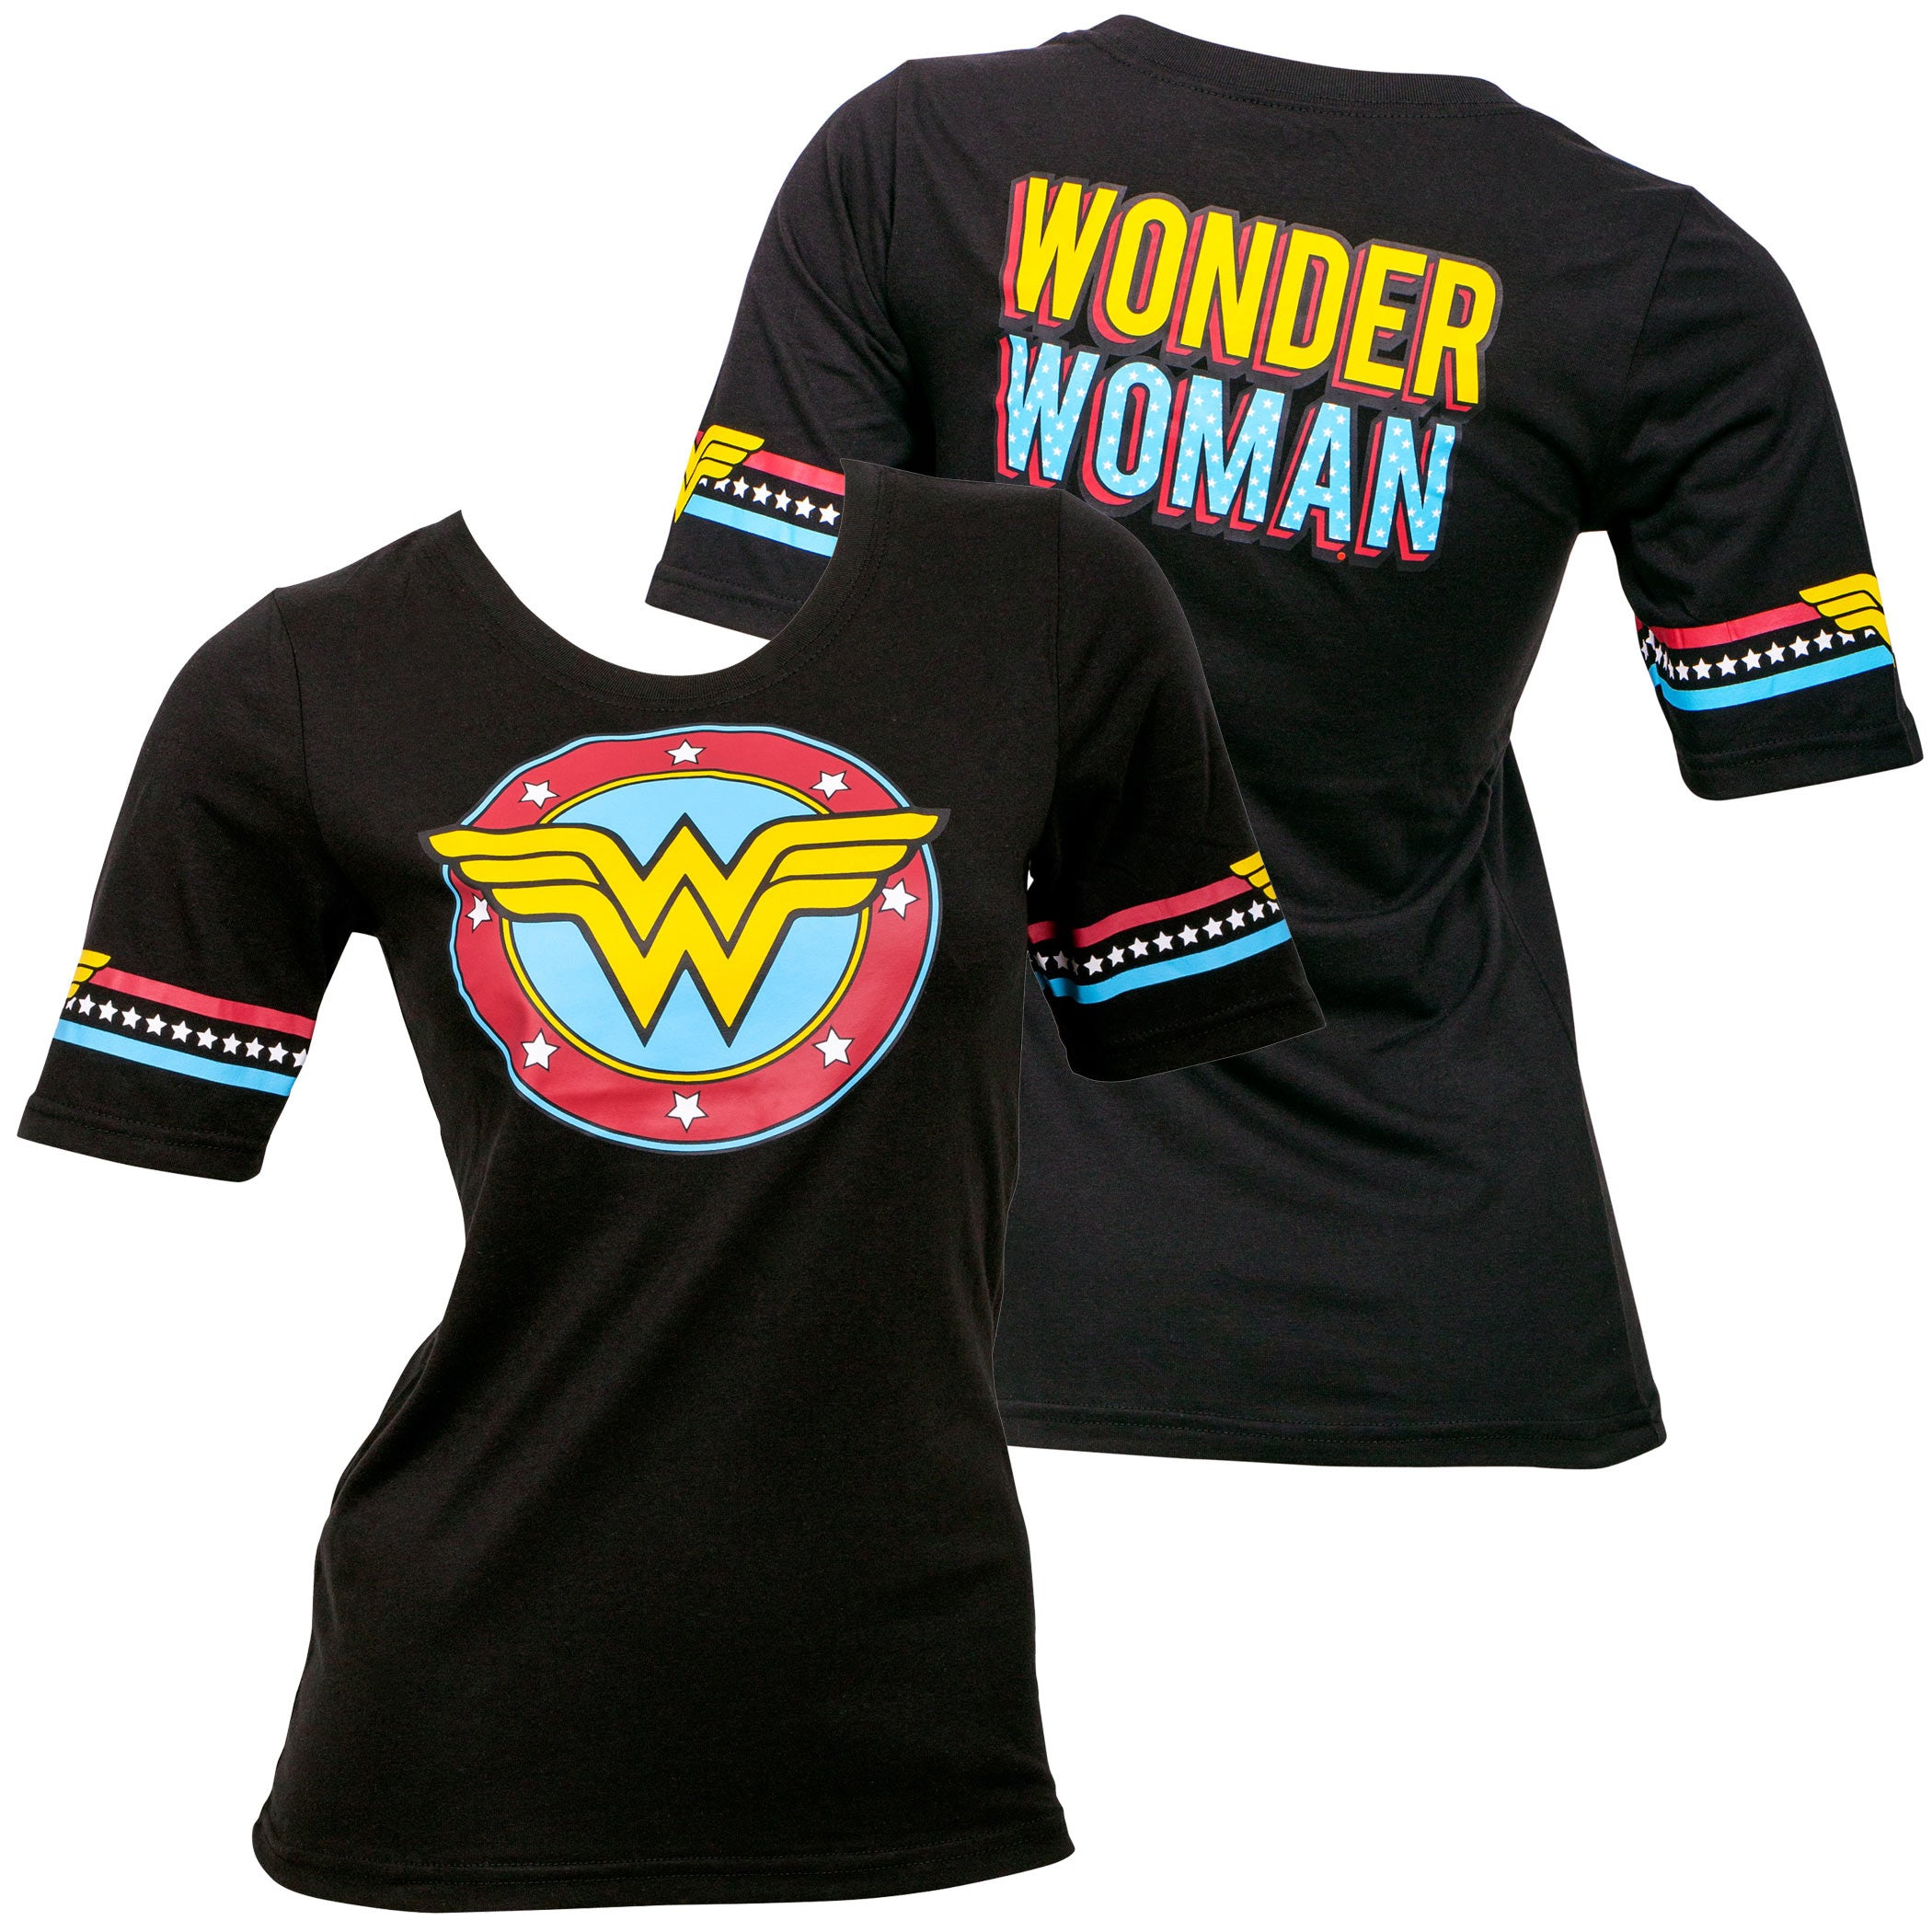 Wonder Woman Star Crest Front and Back Print Women's T-Shirt